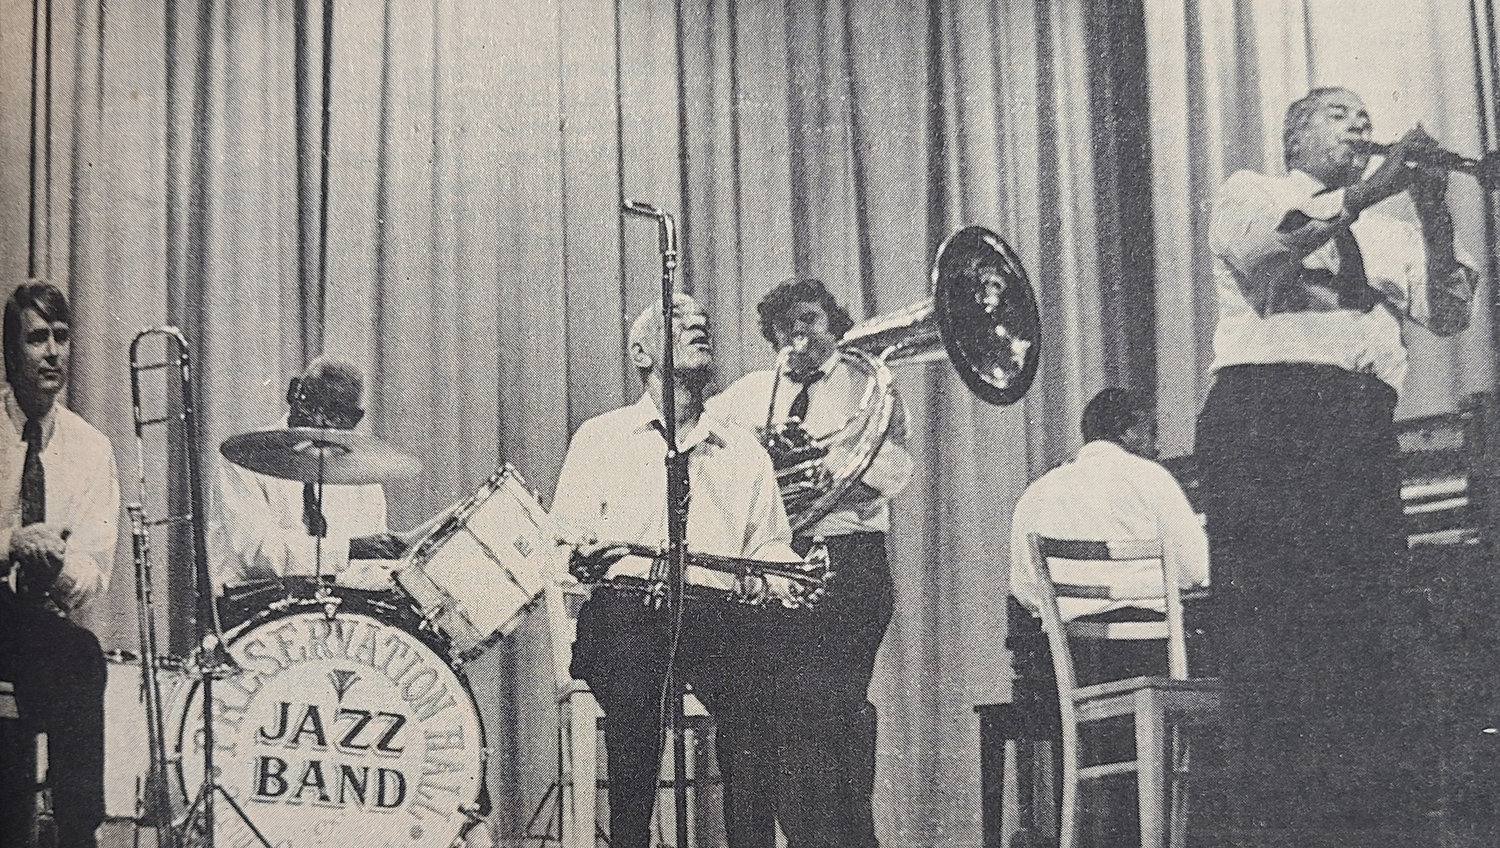 10-14-1971 - Jazz Band Sets Crowd Clapping, Marching